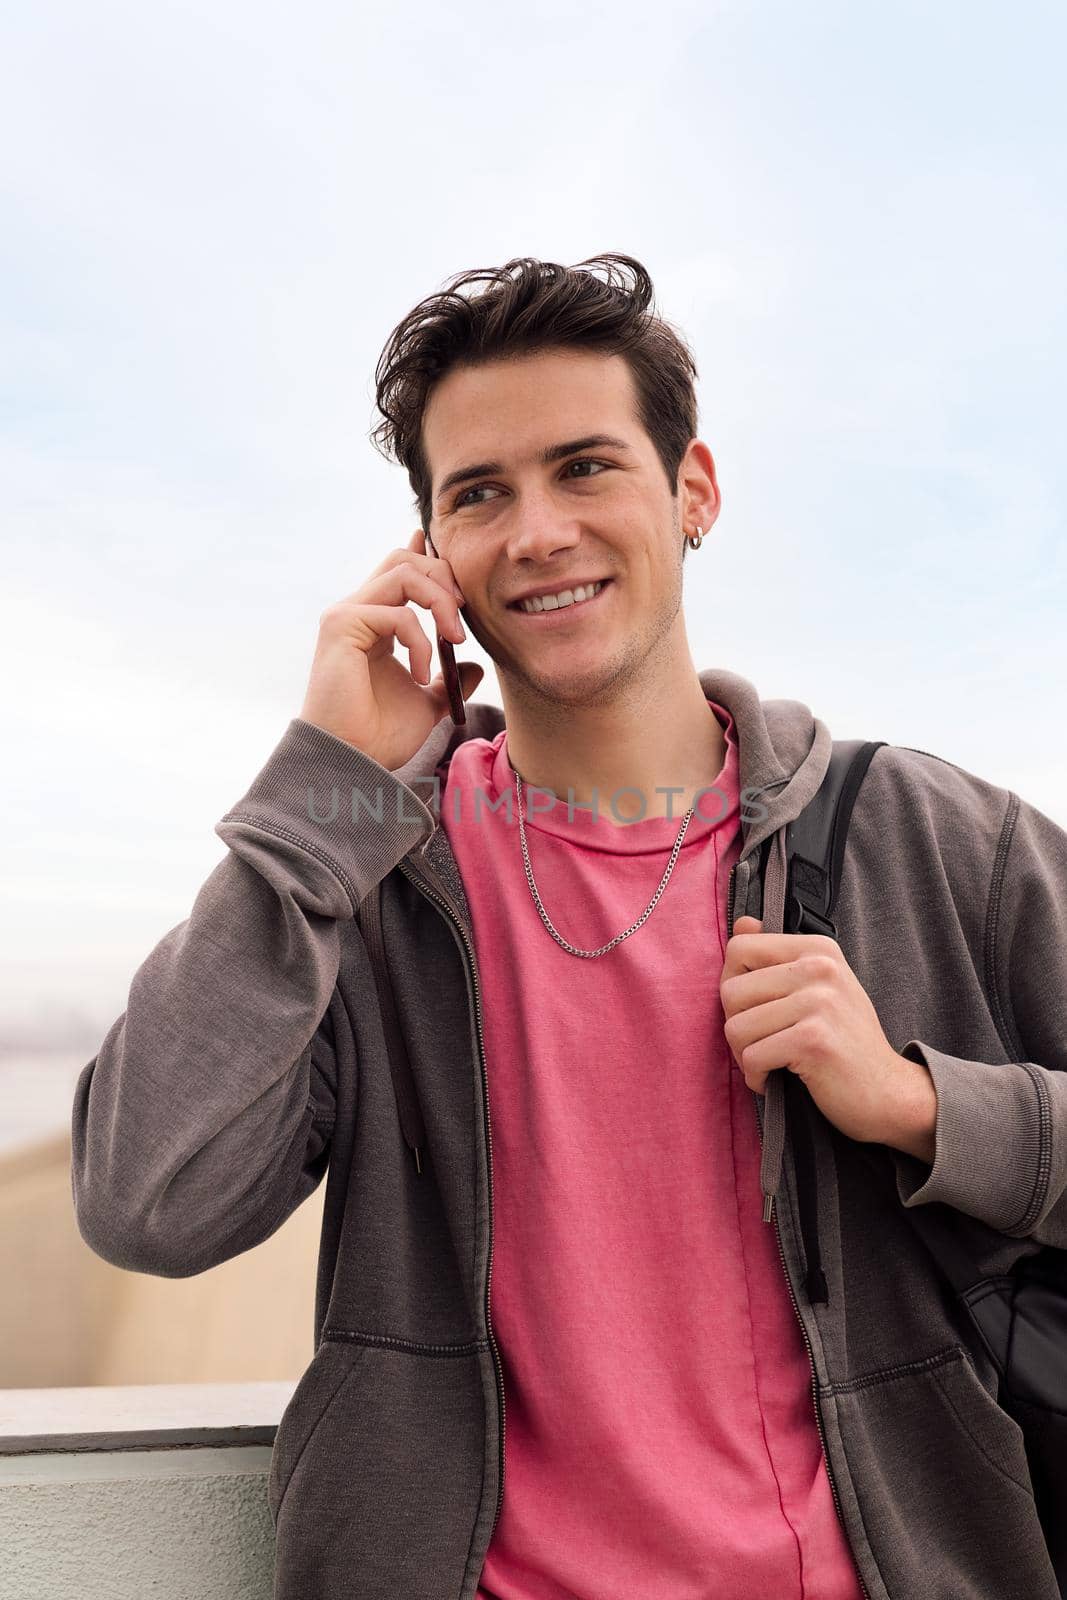 vertical photo of a smiling happy young man talking on mobile phone, concept of communication and urban lifestyle